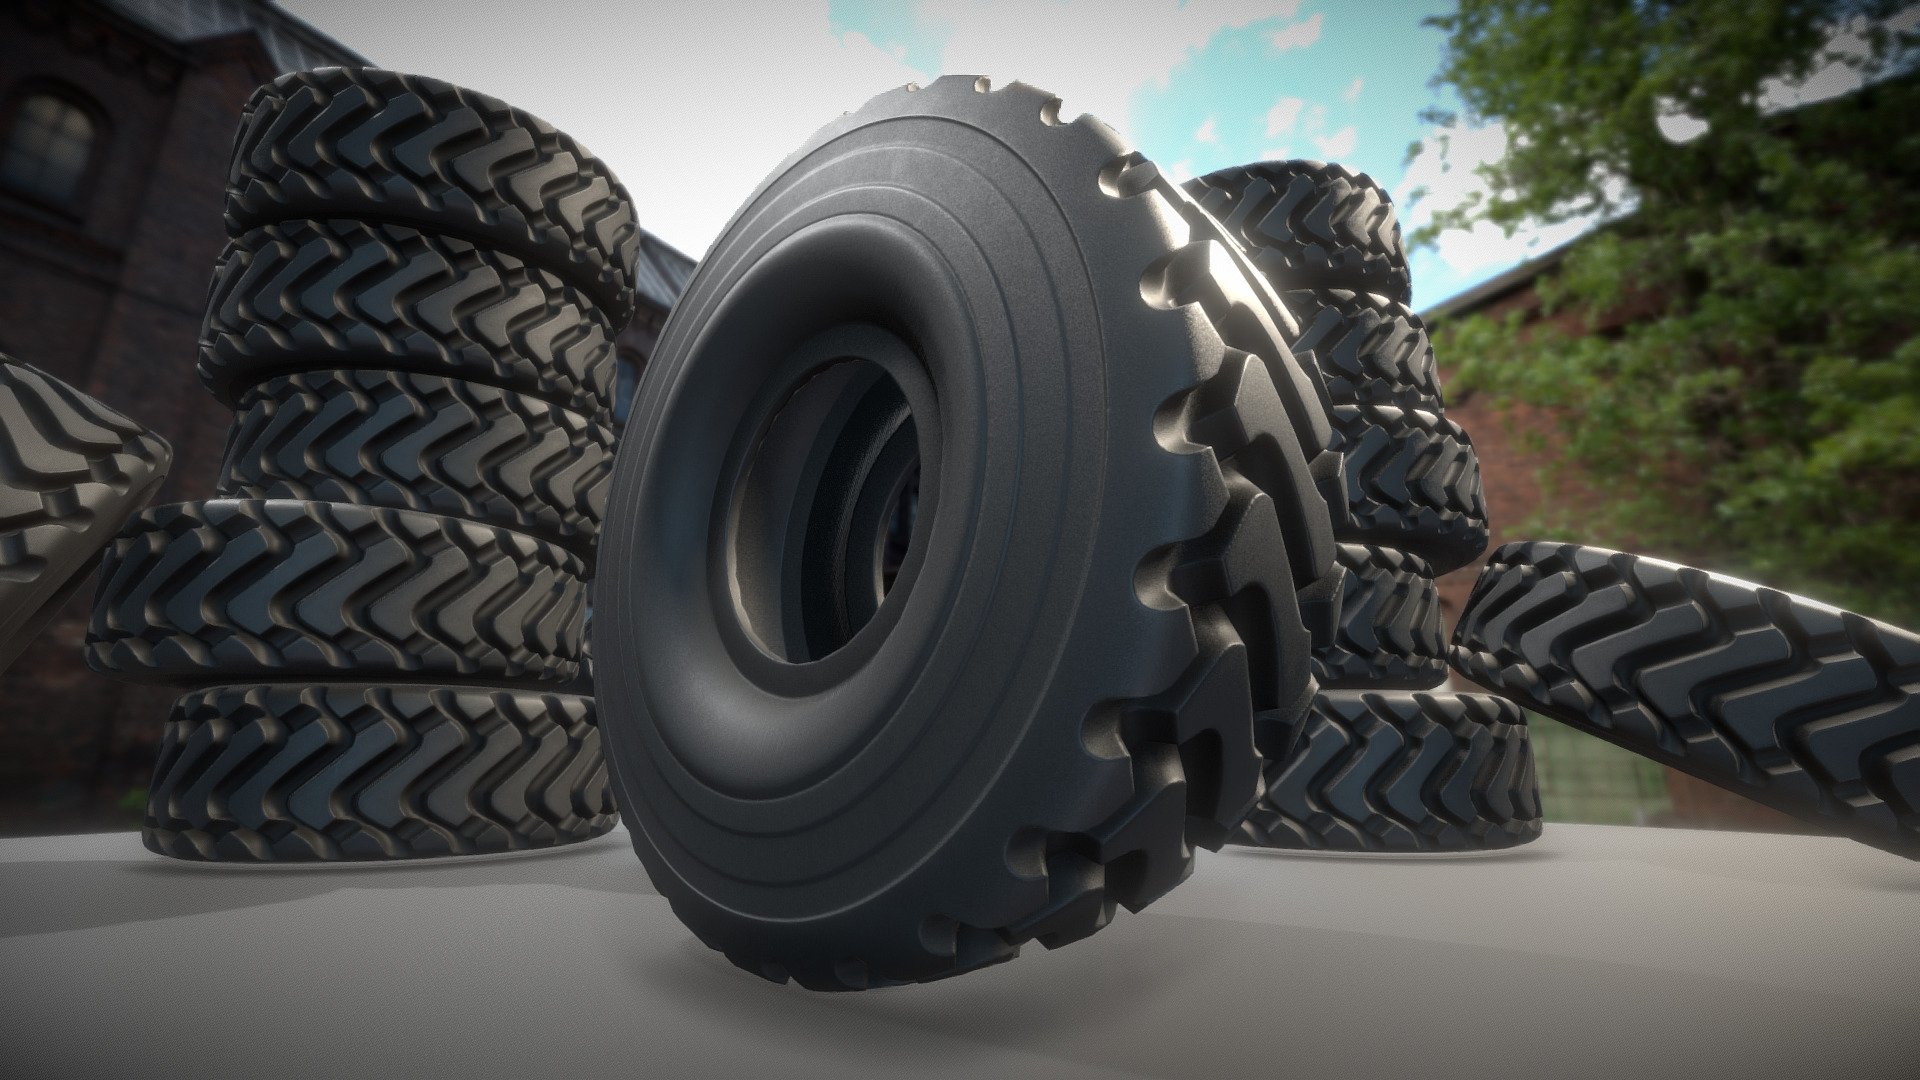 Here is the low-poly version of the wheel loader tyre.






High-Poly Version (Polygons = 930203)

Demo-Video - Blender-2.93






Object Name - Wheel_Loader_Tyres_Low-Poly 

Object Dimensions -  1.721m x 0.663m x 1.721m






Vertices = 2886

Polygons = 3536






Object rotation and location is 0, scale is 1.000 x 1.000 x 1.000

Texture map types: Base Color, Normal, Metalness, Roughness



3D model formats: 




Native format (*.blend)

Autodesk FBX (.fbx)

OBJ (.obj, .mtl)

glTF (.gltf, .glb)

X3D (.x3d)

Collada (.dae)

Stereolithography (.stl)

Polygon File Format (.ply)

Alembic (.abc)

DXF (.dxf)

USDC



Last update:
18:31:53  17.05.22






3d-modeled and PBR-Textured by 3DHaupt in Blender-3D.
 - Wheel Loader Tyres (Low-Poly Version) - Buy Royalty Free 3D model by VIS-All-3D (@VIS-All) 3d model